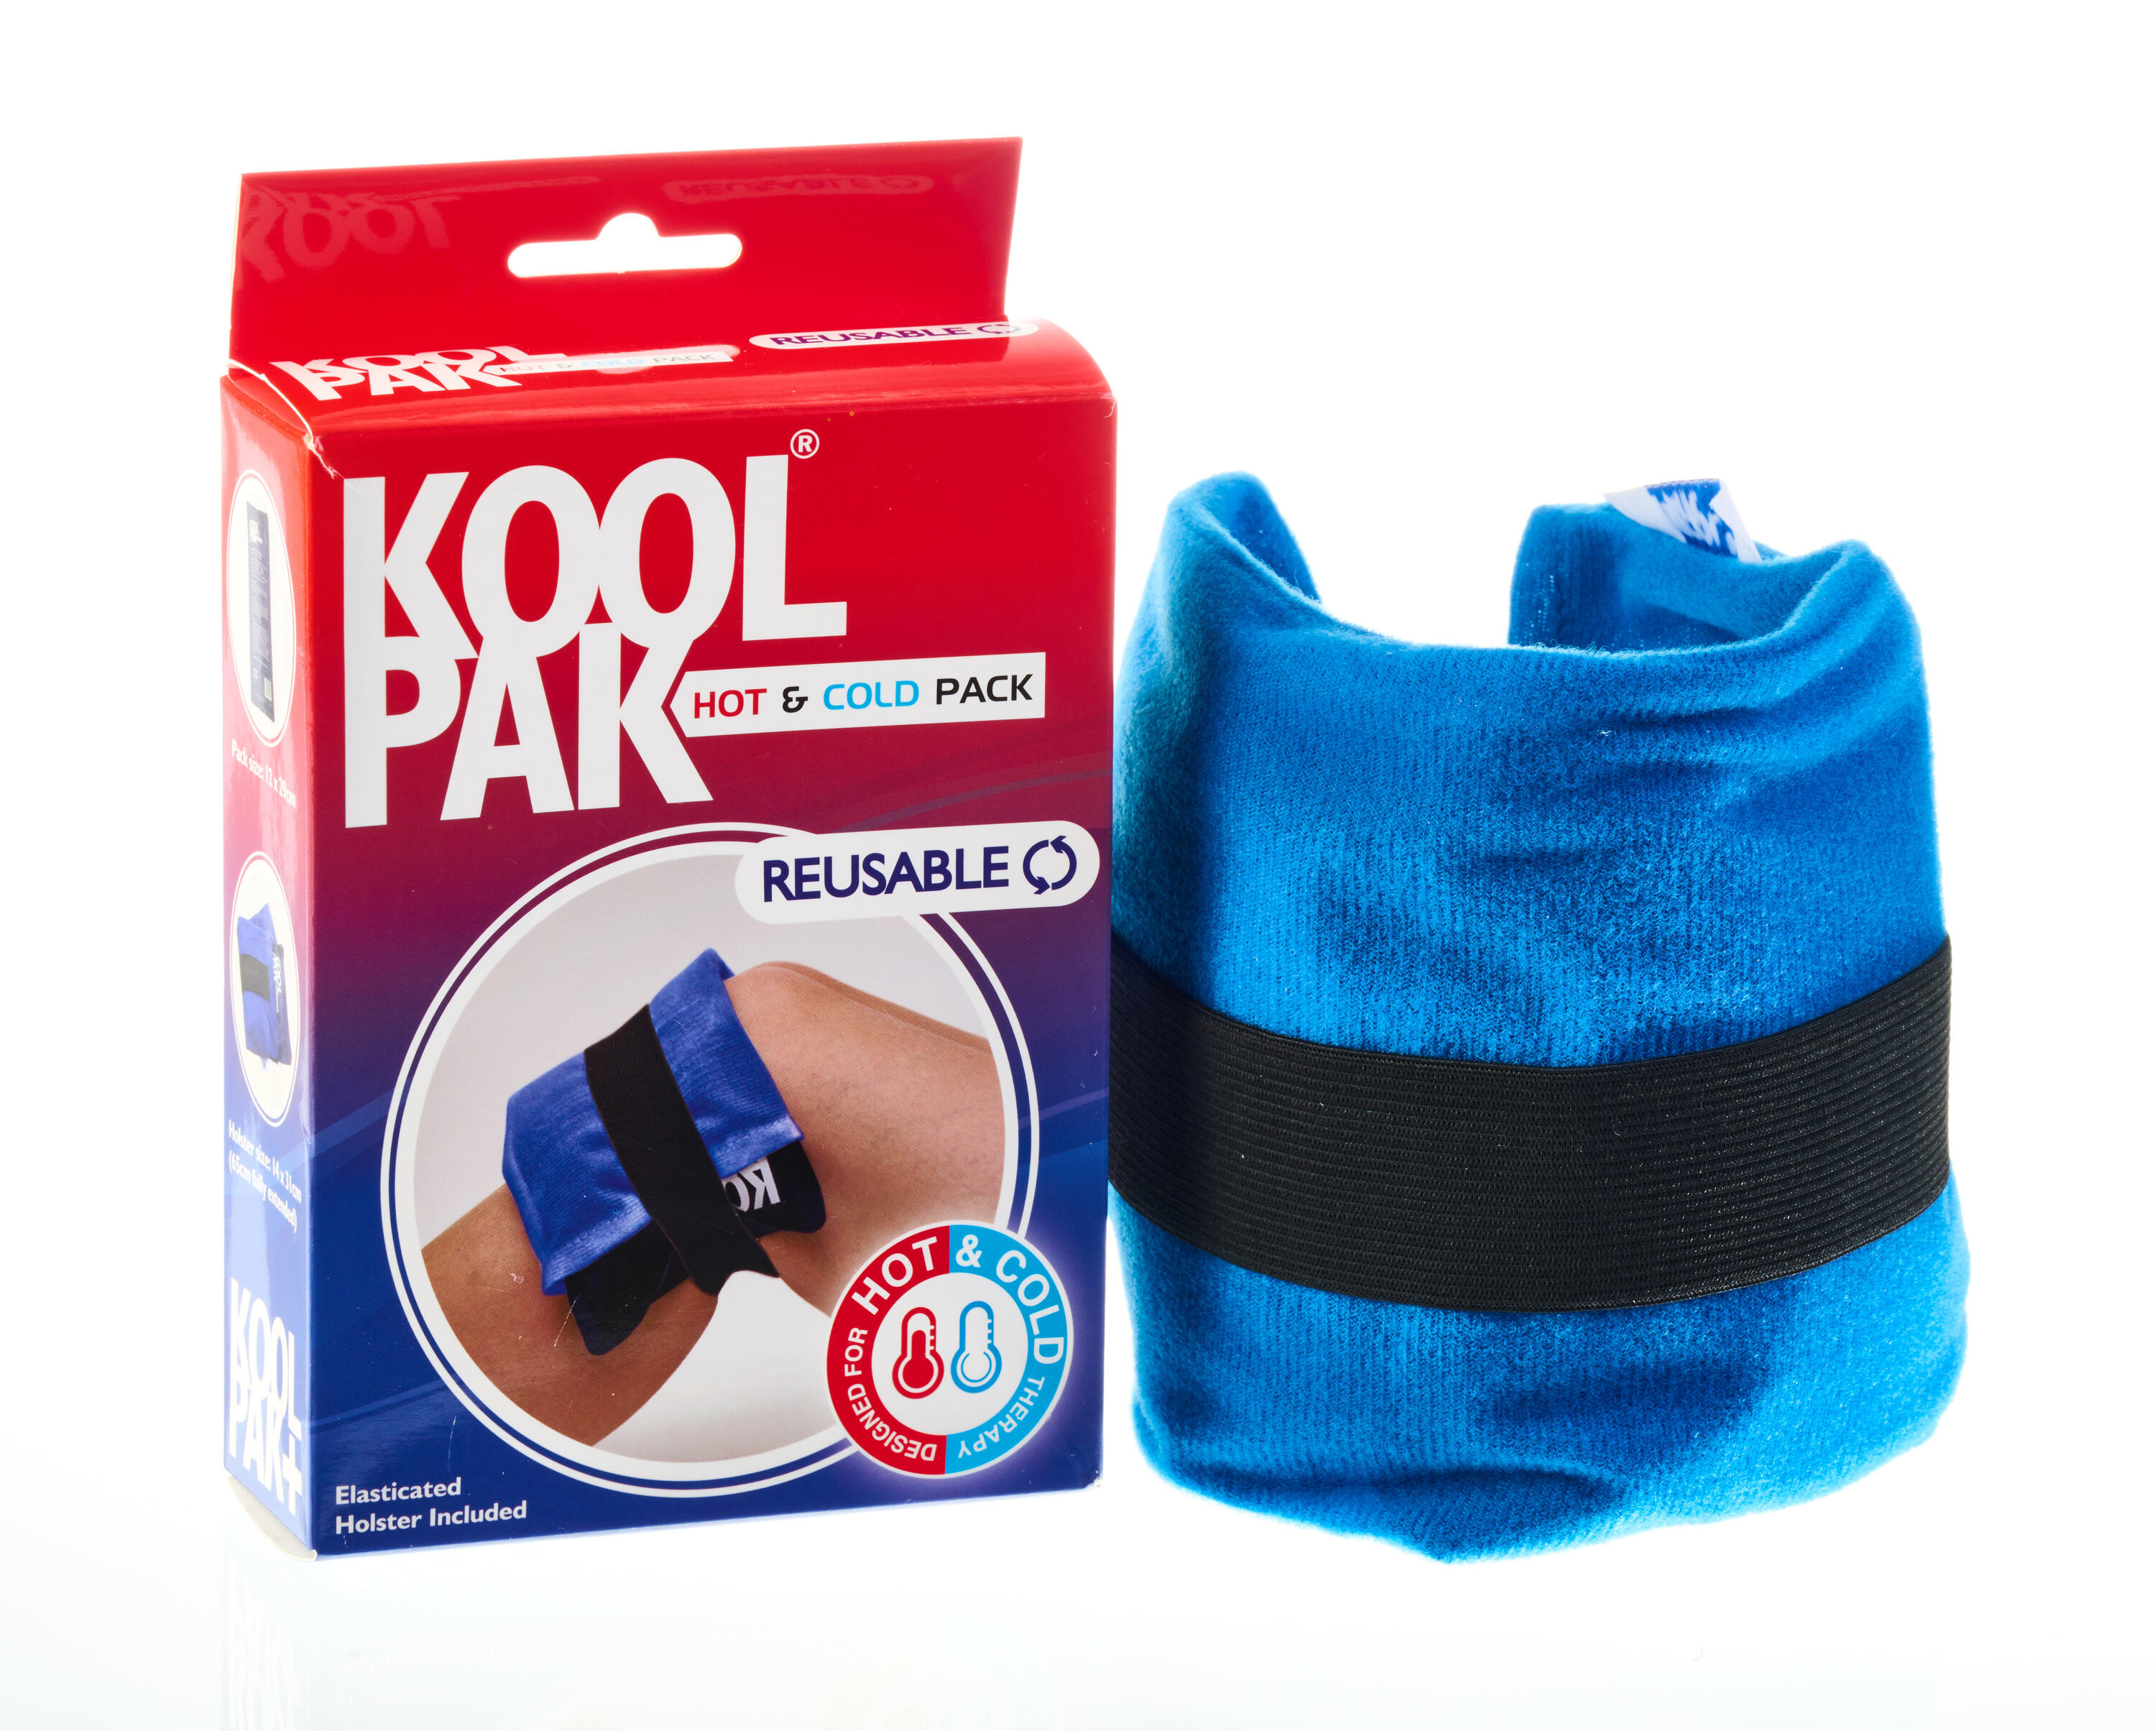 Koolpak Luxury Reusable Hot Cold Pack - 12 x 29cm with Elasticated Holster 1/5